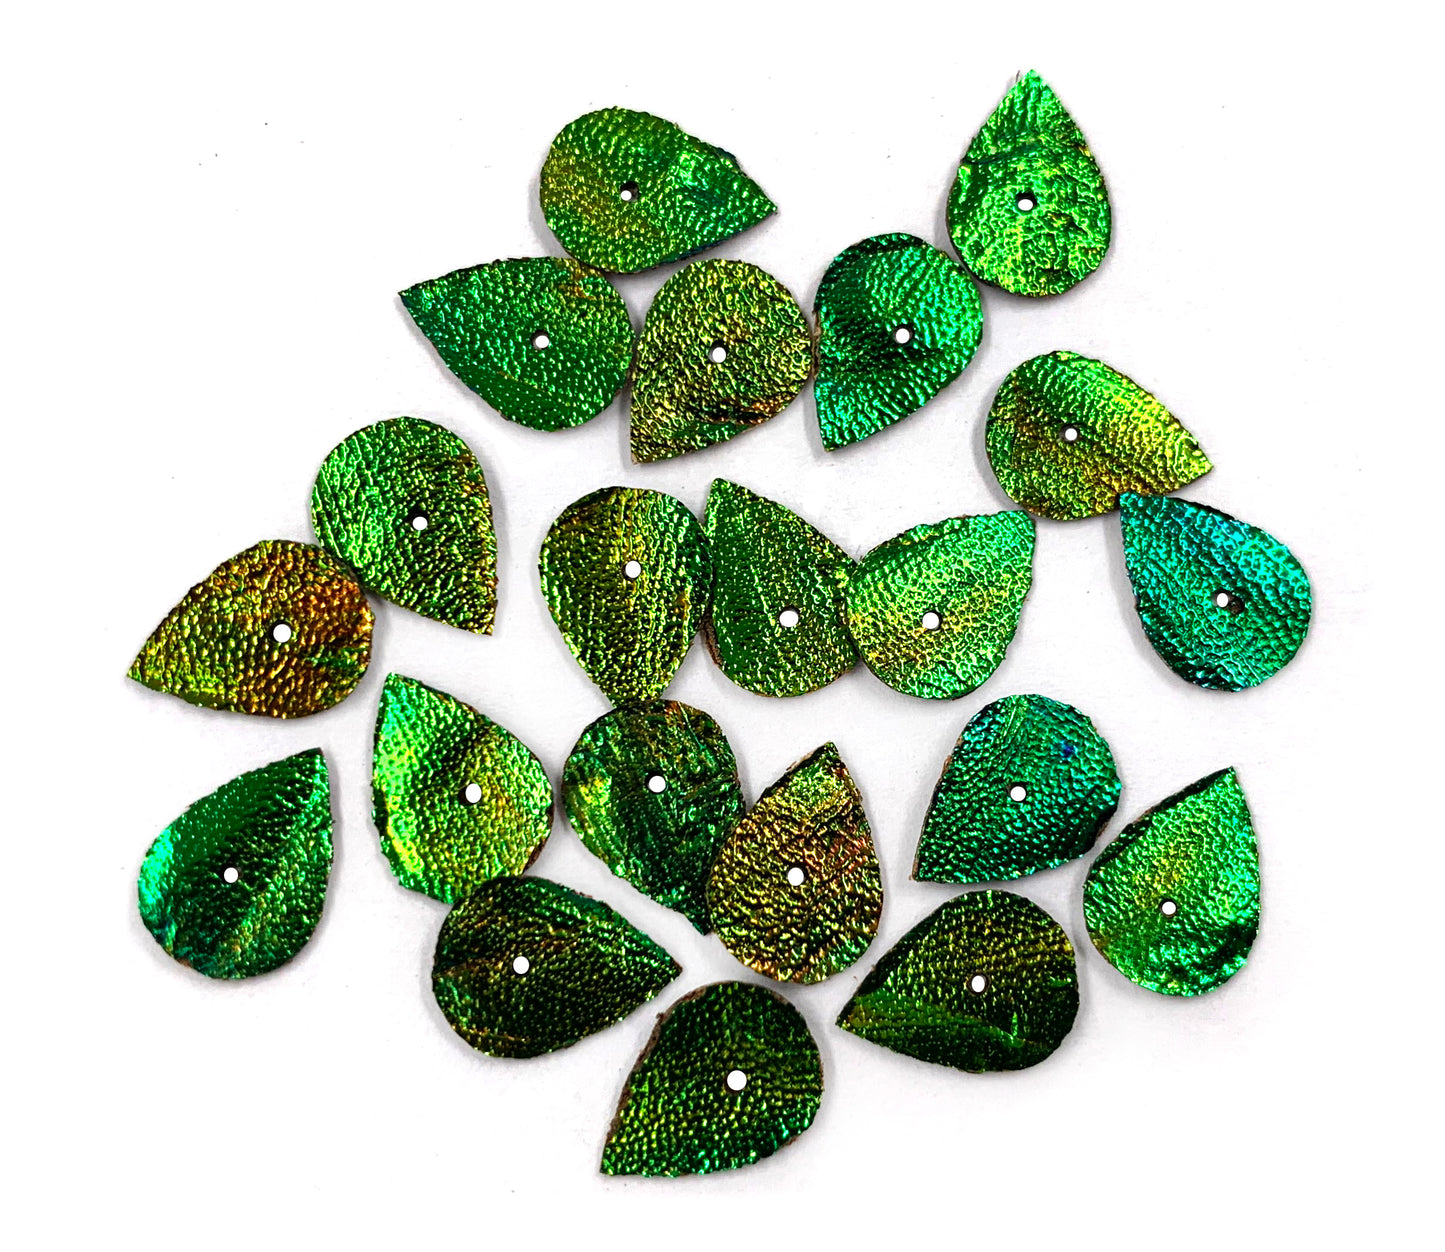 Jewel Beetle Wings UNDRILLED NO-HOLE 100 Pcs Natural Wings - RAINDROP 1 CM x 0.5 CM